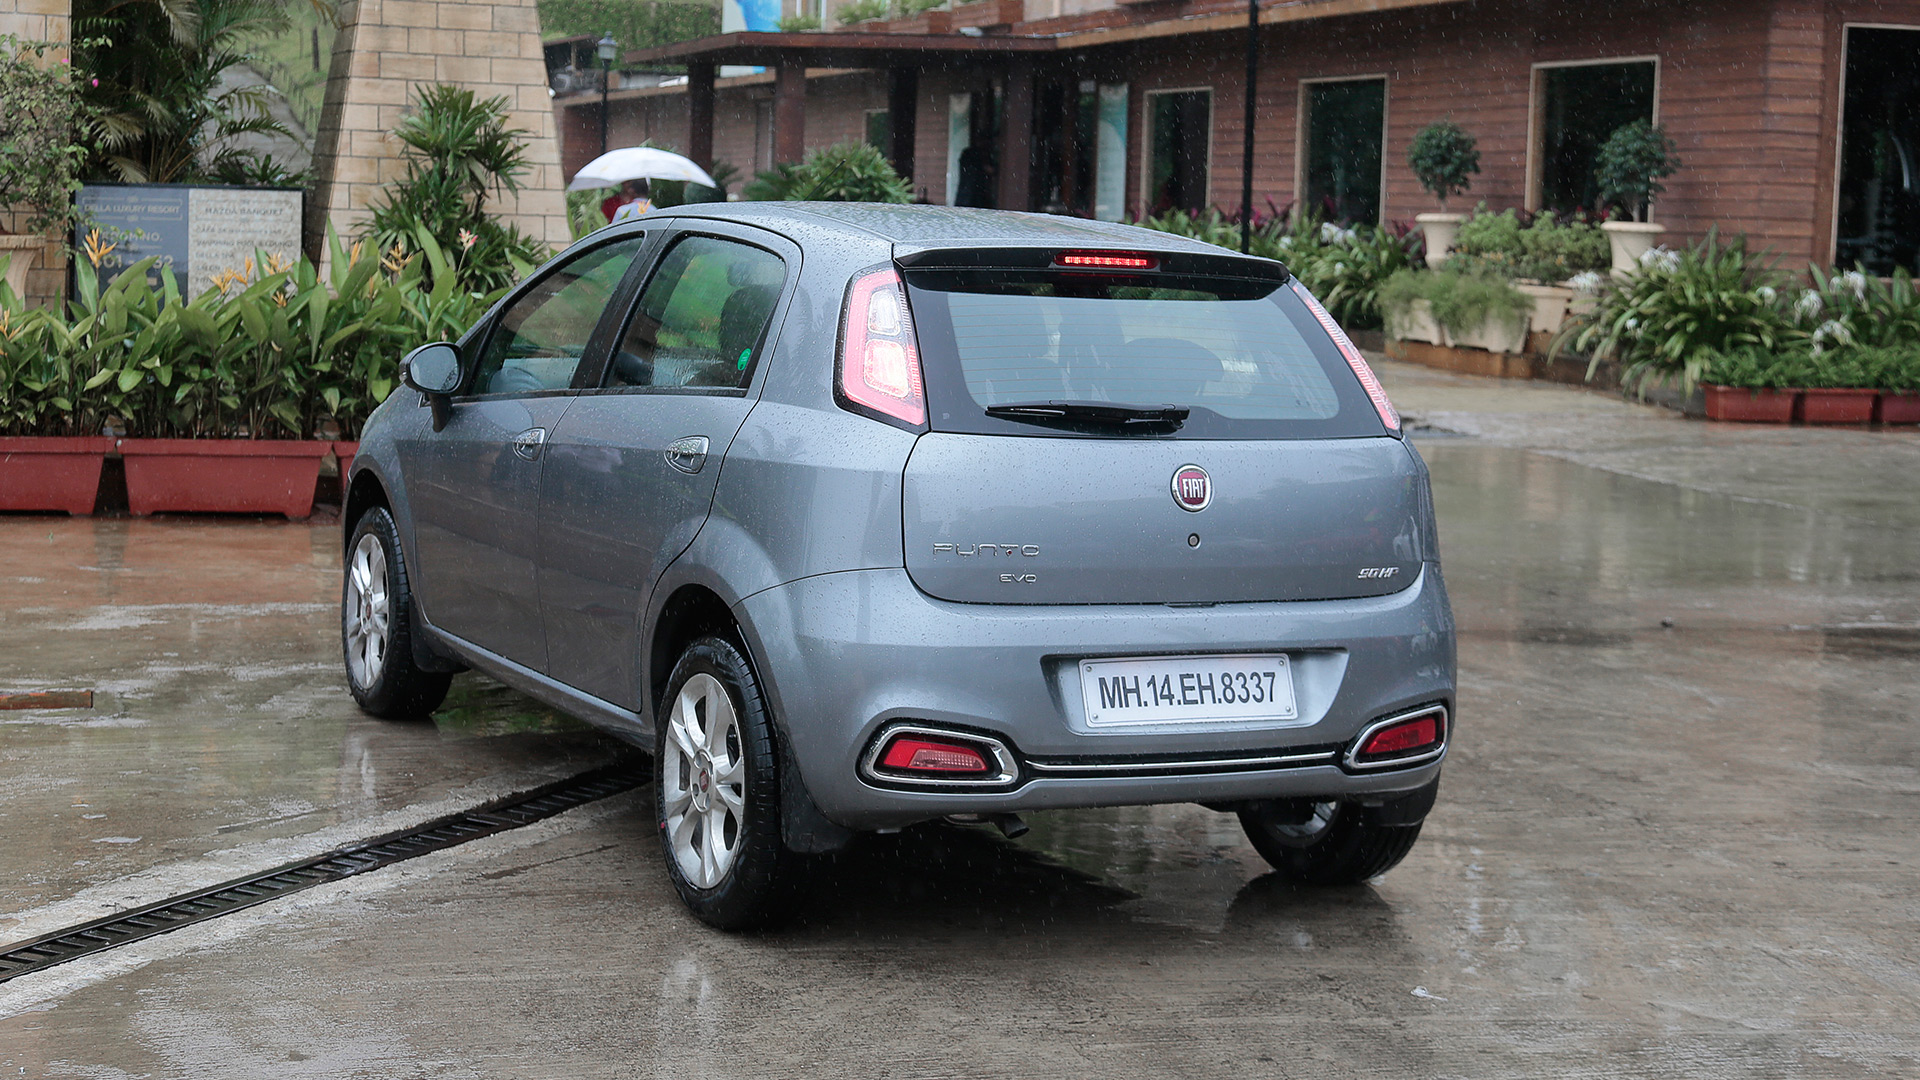 Fiat Punto Evo 2014 90-HP - Price in India, Mileage, Reviews, Colours,  Specification, Images - Overdrive